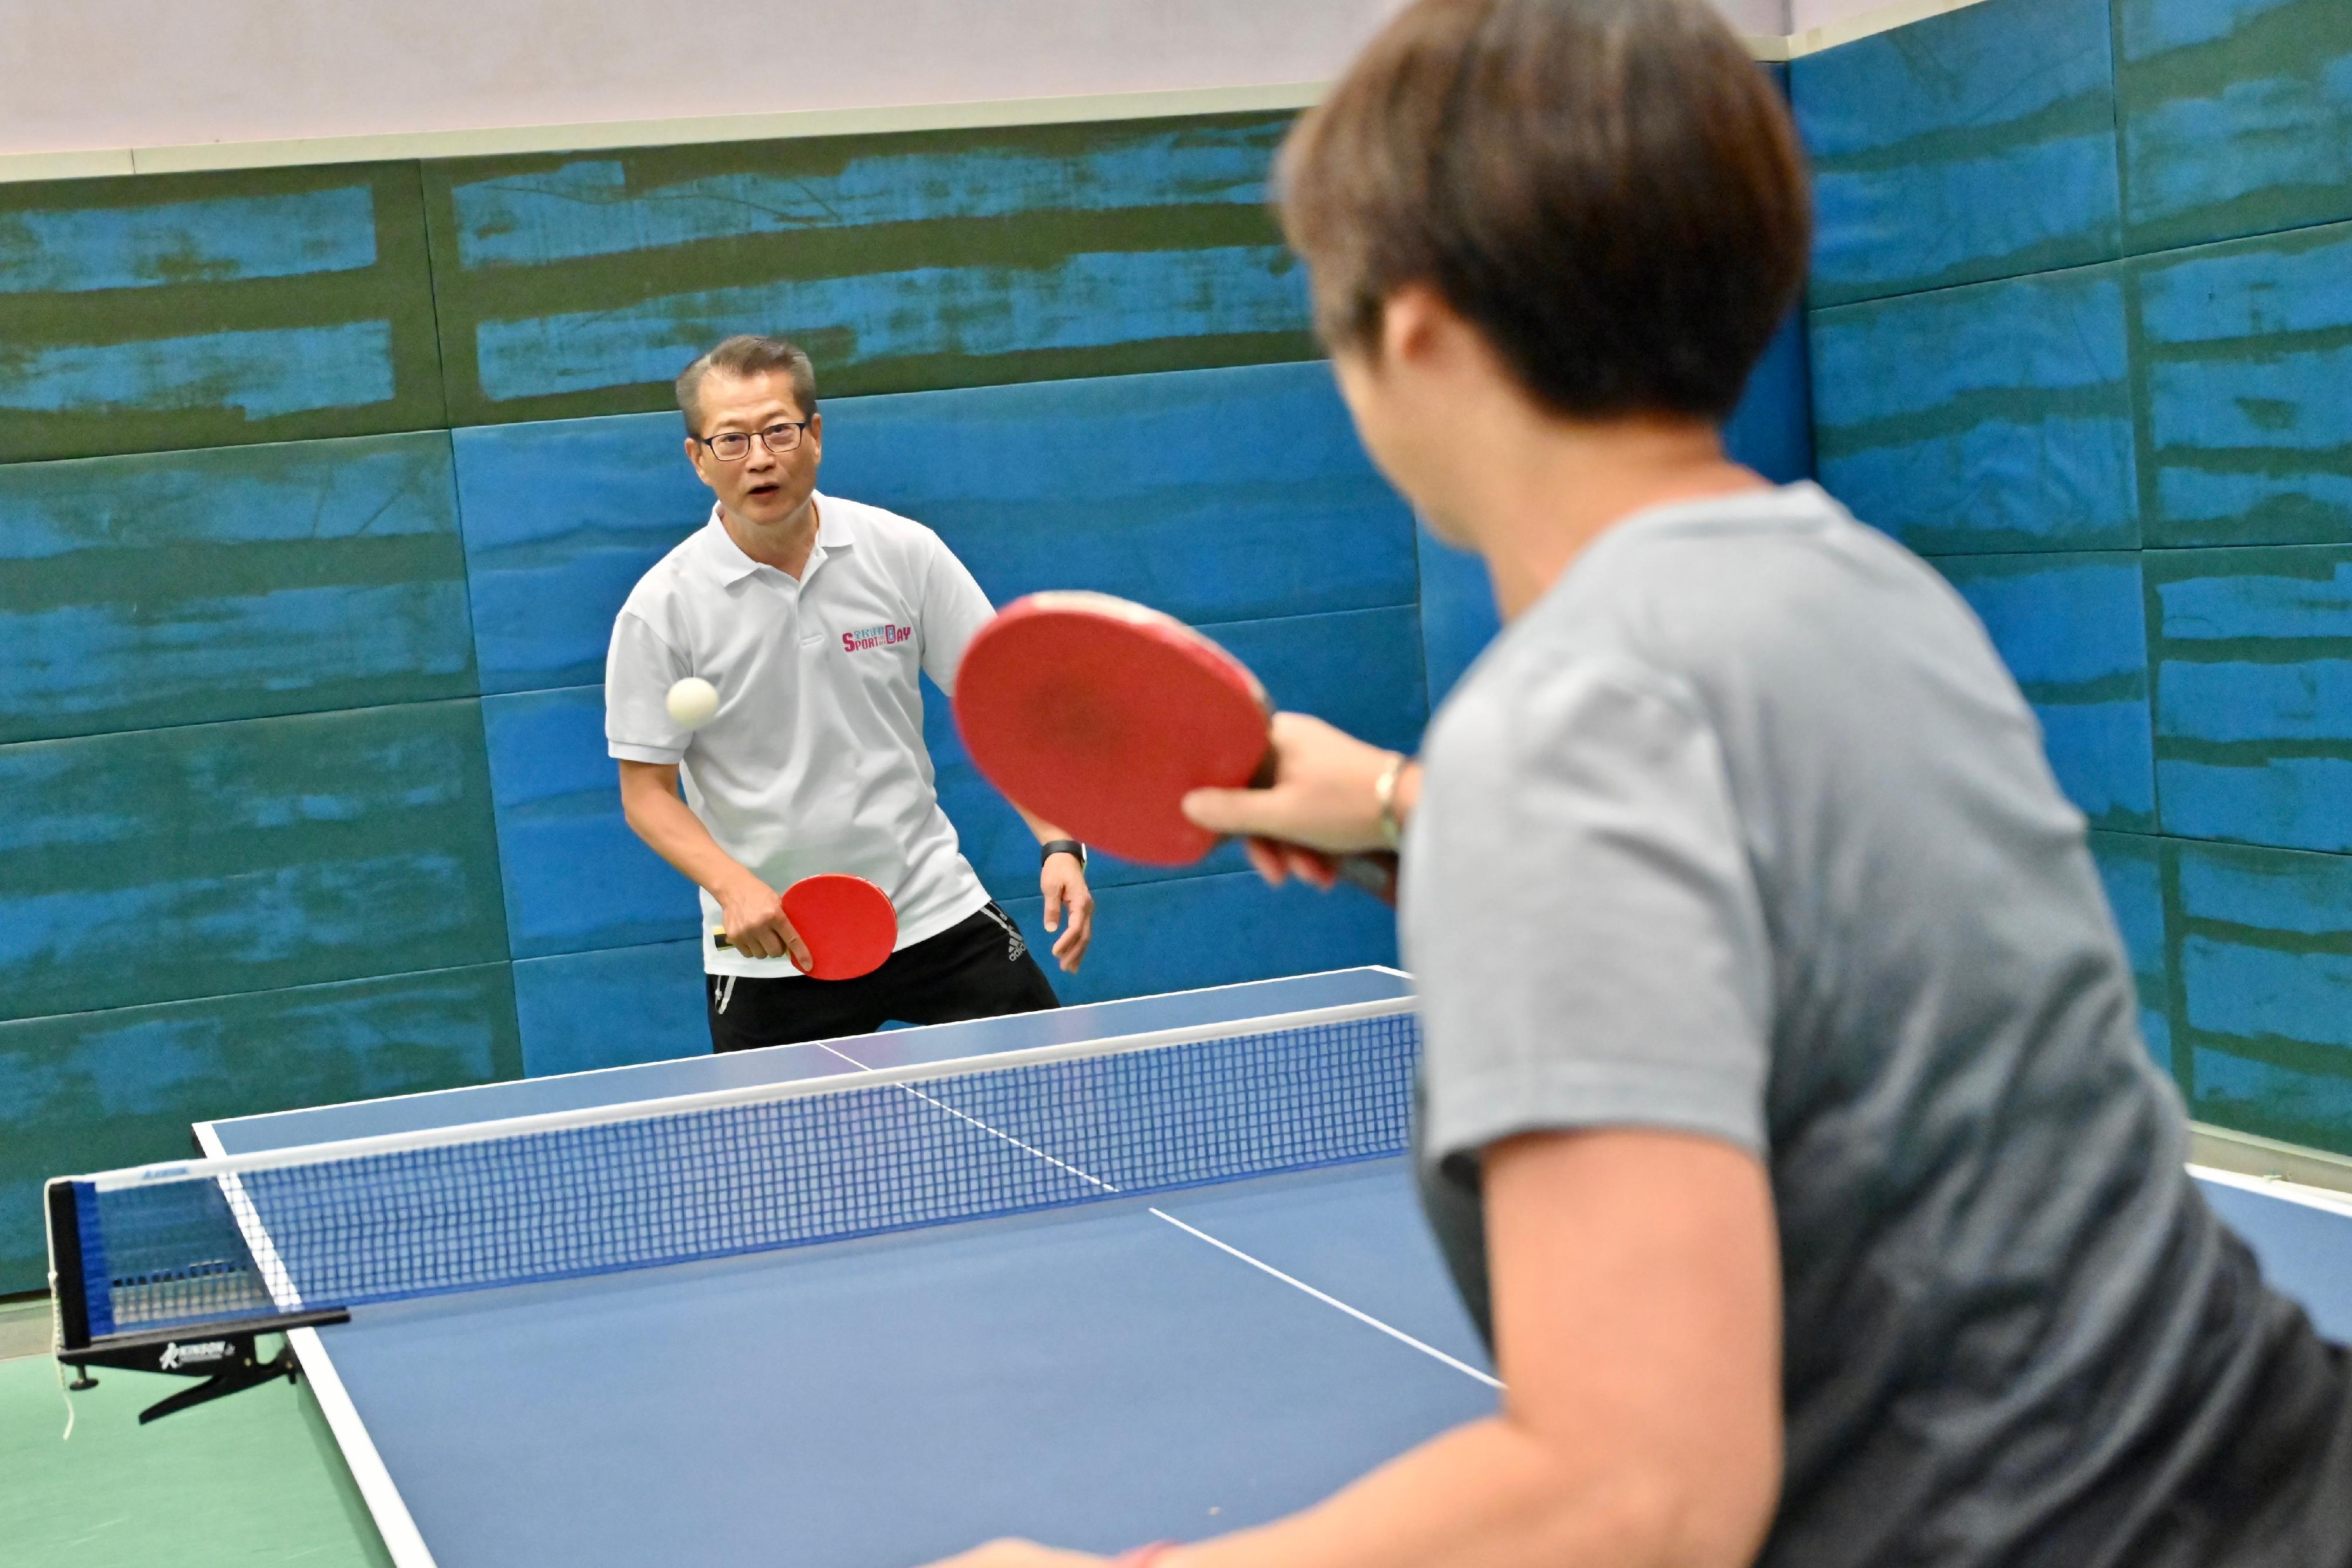 The Financial Secretary, Mr Paul Chan, participated in the Sport For All Day 2023 organised by the Leisure and Cultural Services Department at Island East Sports Centre today (August 6). Photo shows Mr Chan (left) in a table tennis play-in session with a member of public.